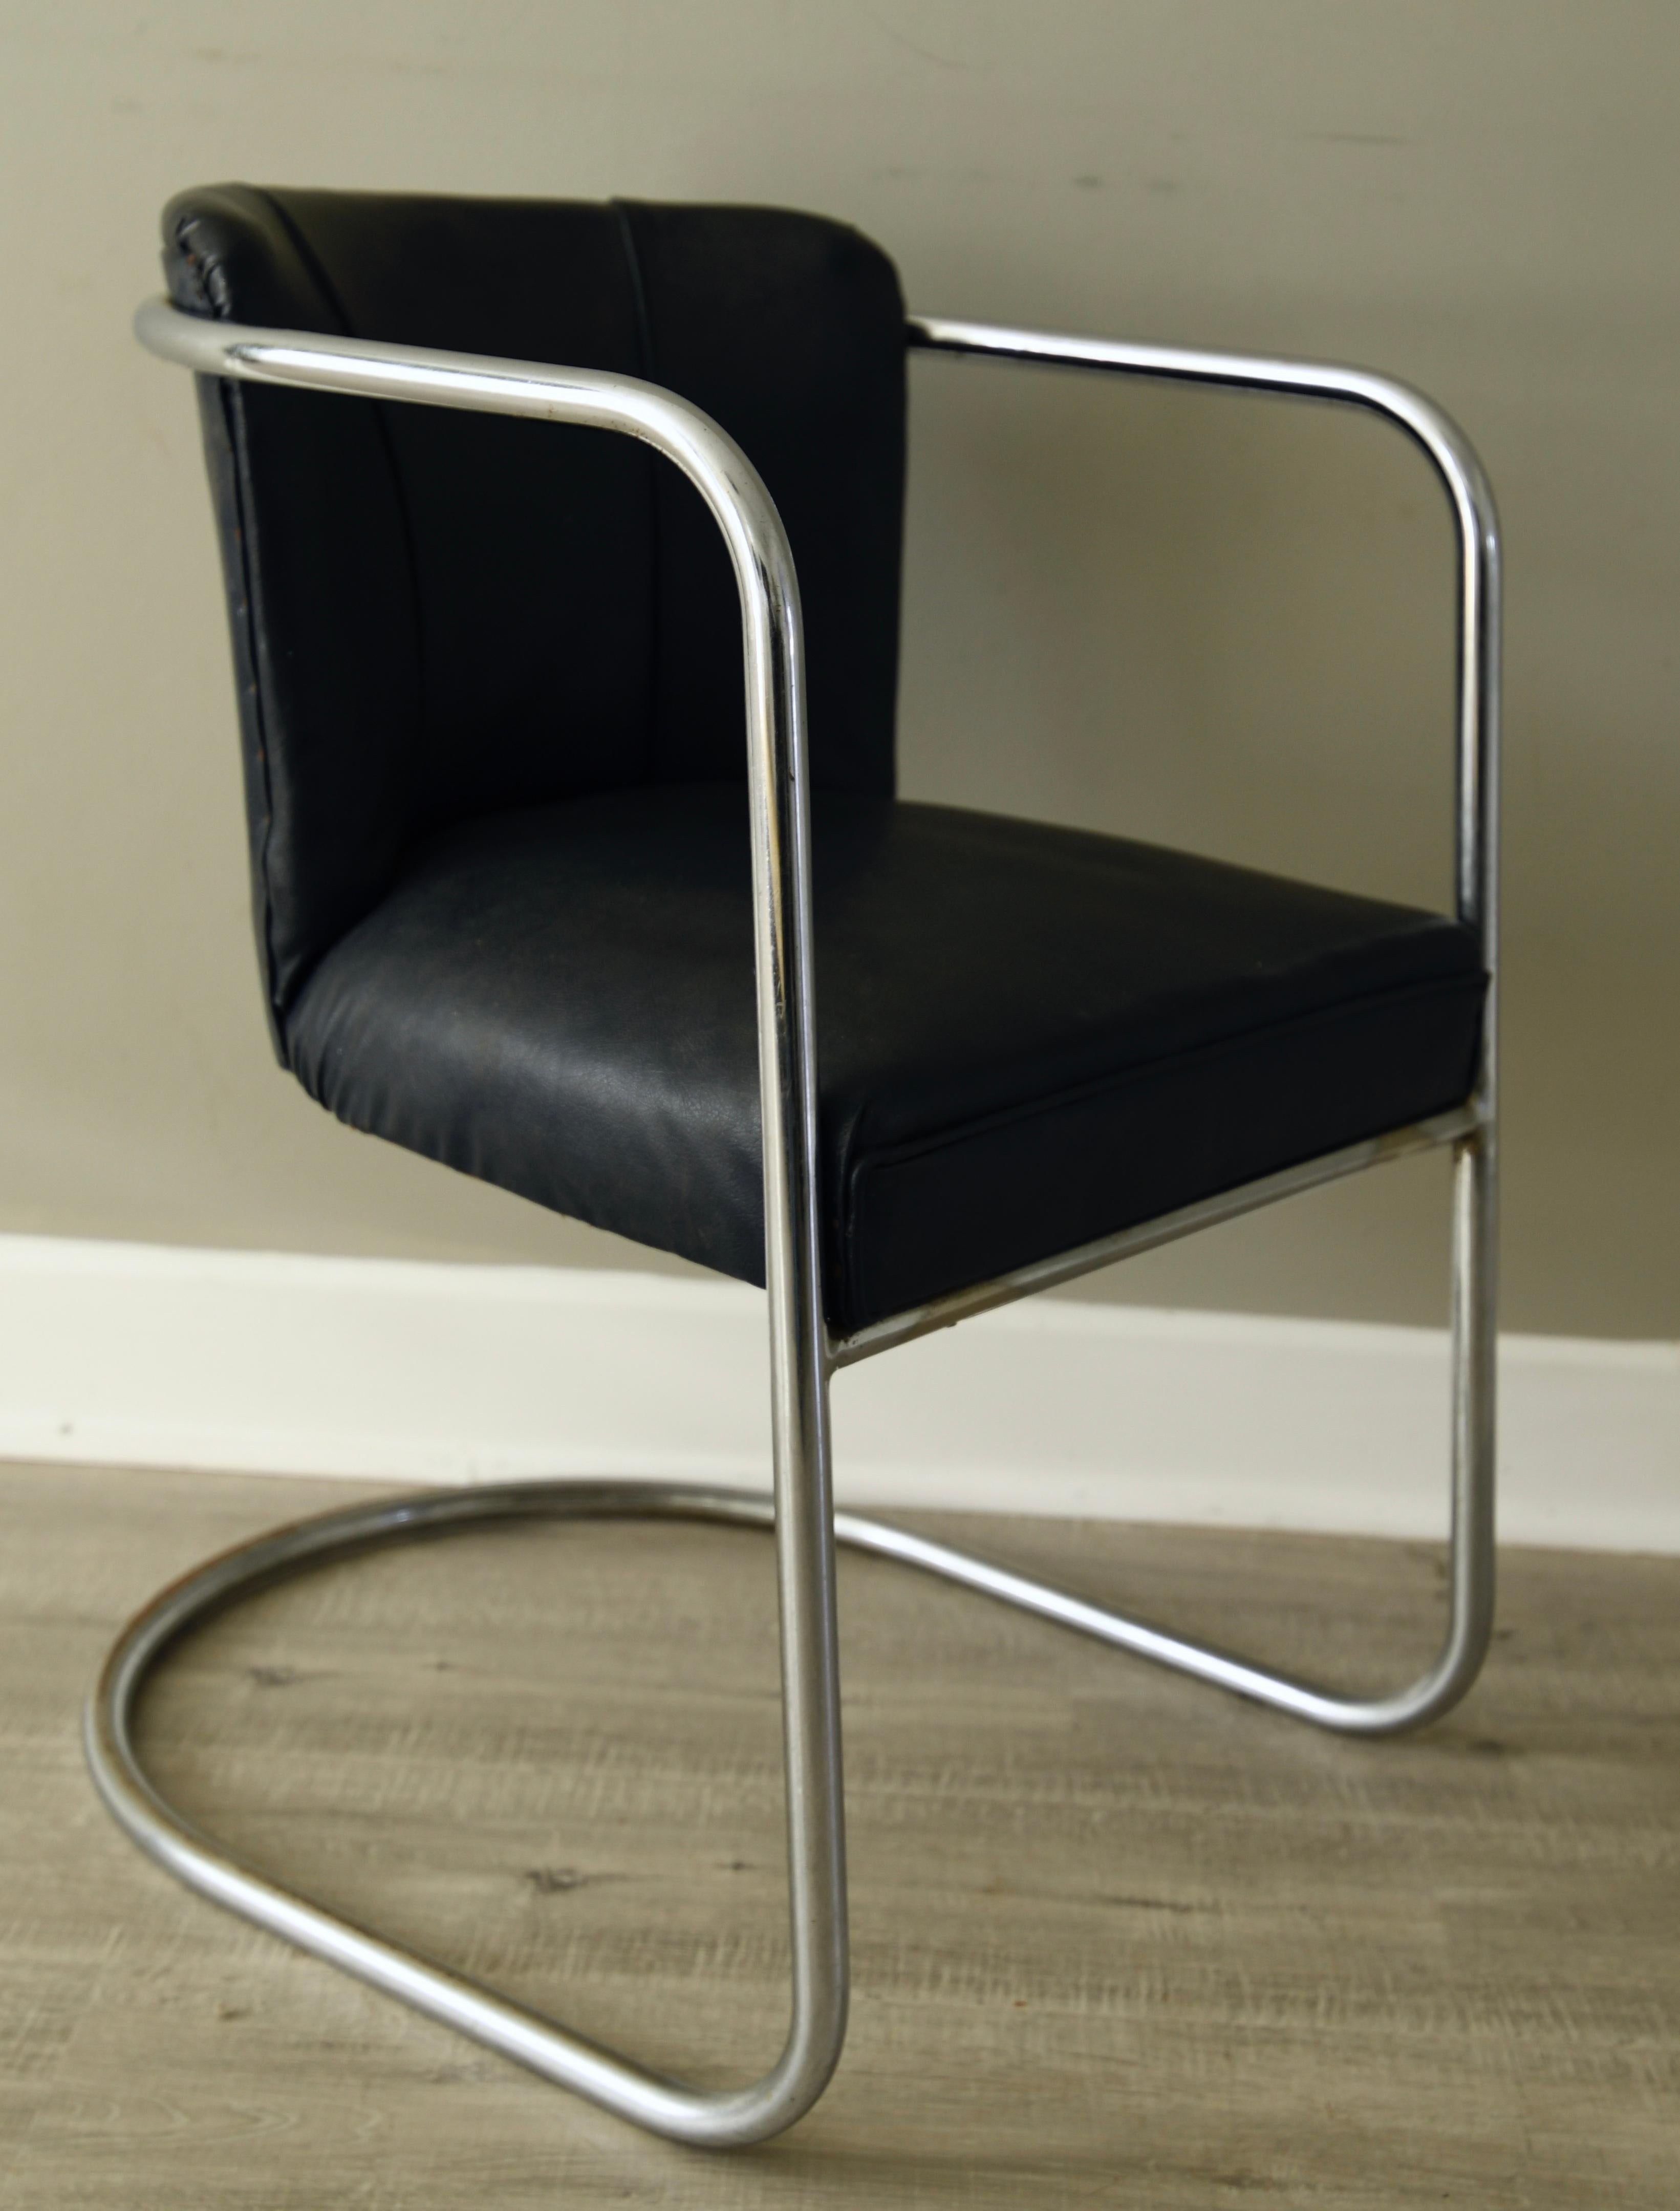 An elegant signed 1930s 1940s PEL tubular steel armchair with continuous tubular chrome horseshoe cantilever base, the steel wraps around the back and forms the armrests, upholstered in their original dark blue leatherette. The shape of the chair,